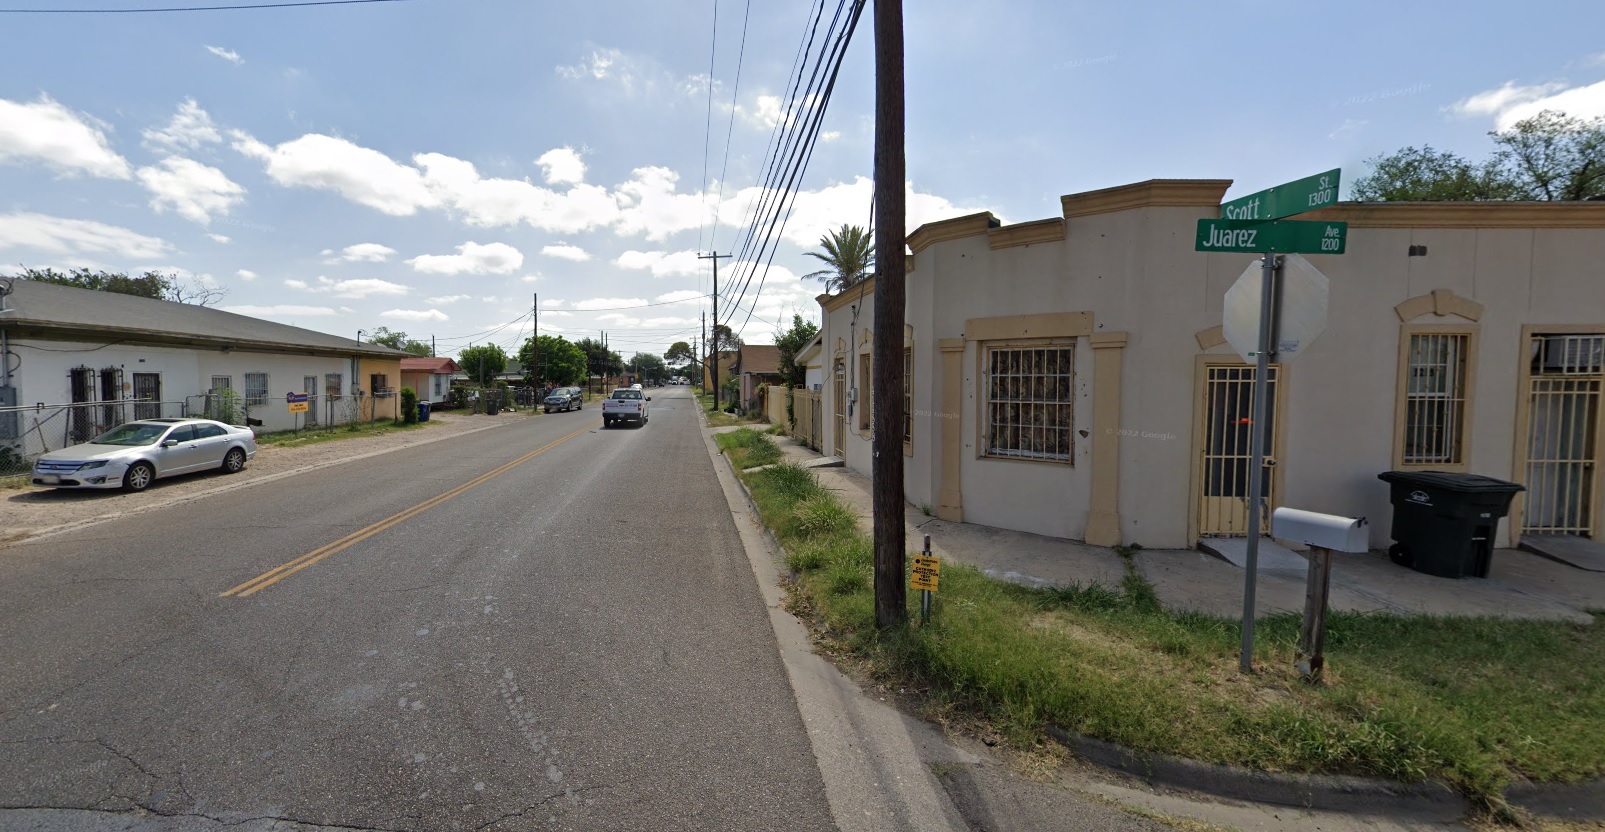 Man, woman engaged in sexual act in public near downtown Laredo